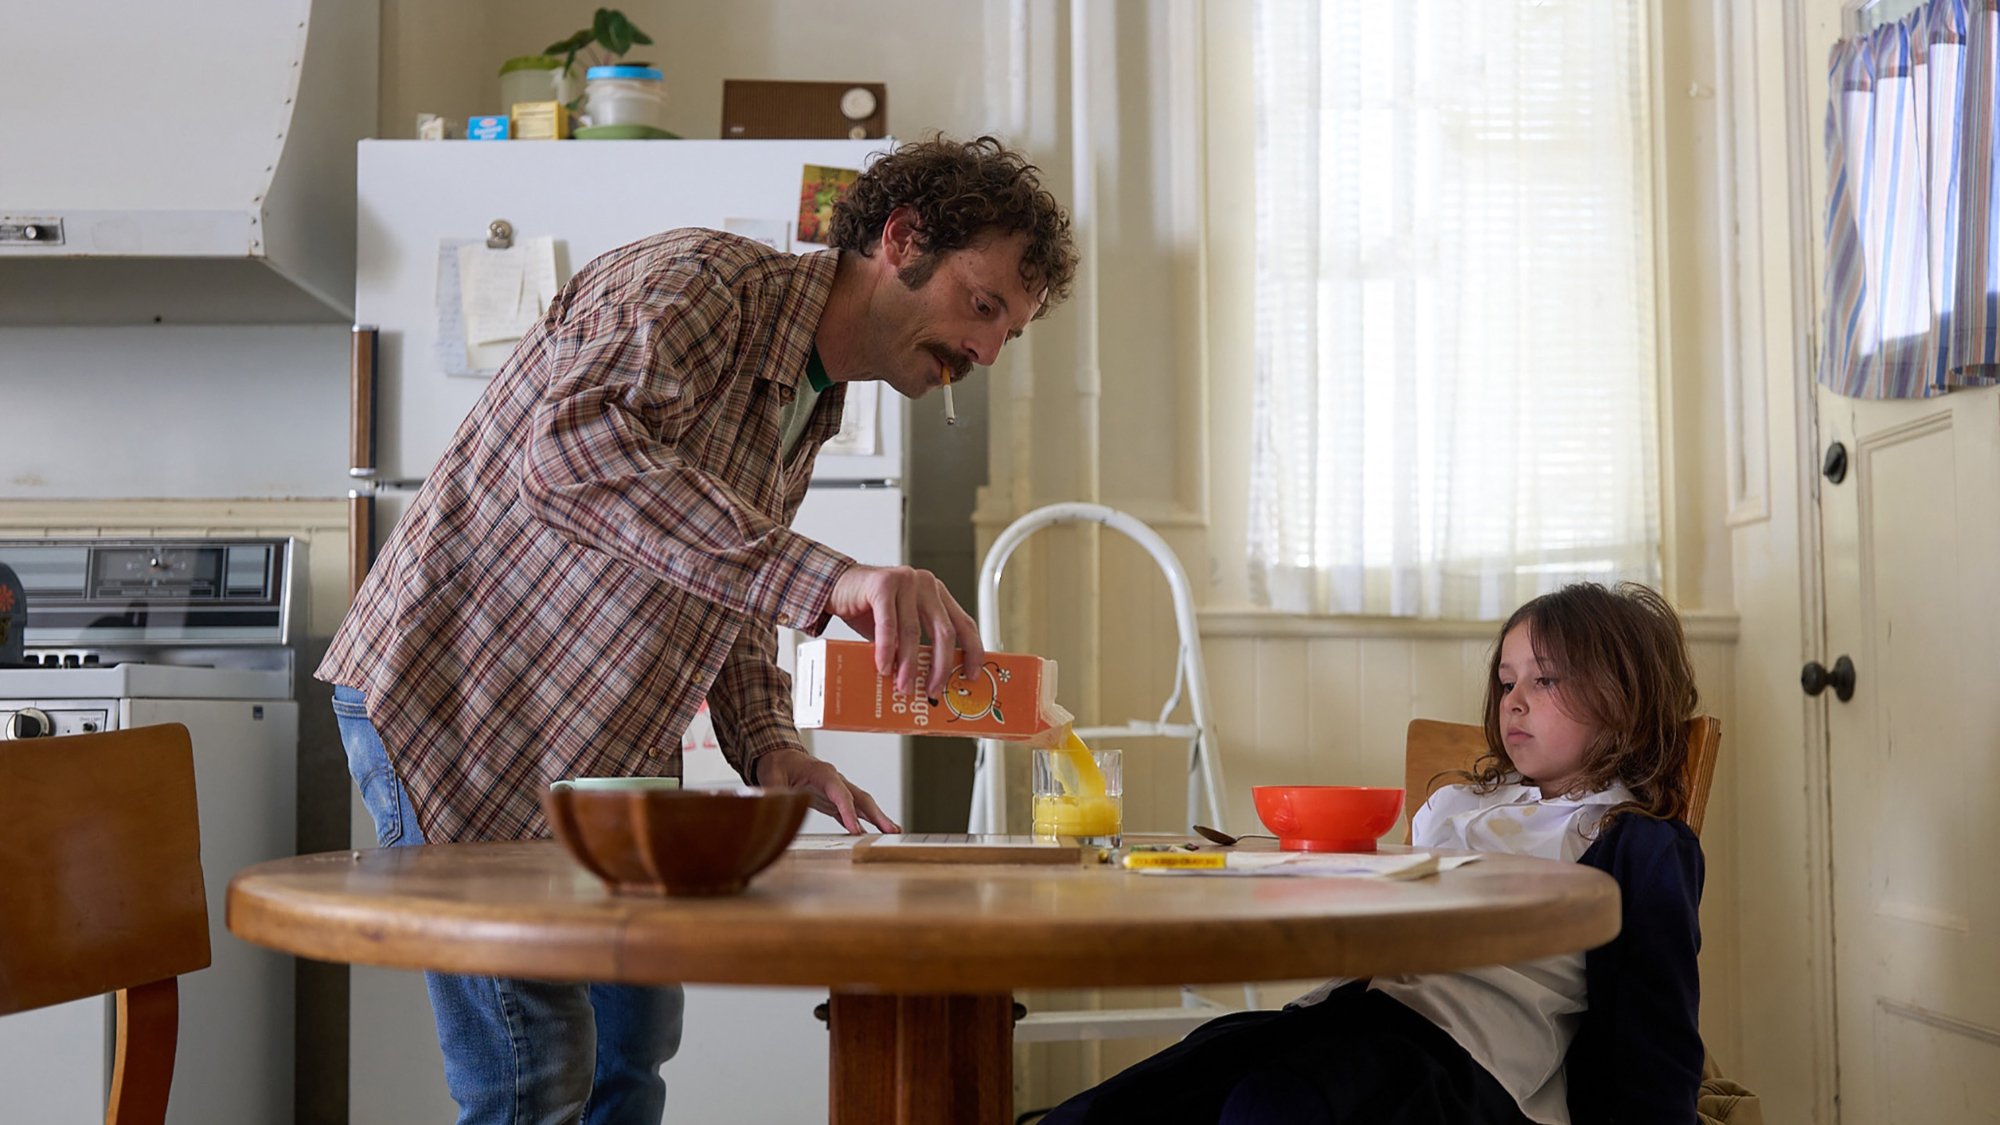 'Fairyland' Scoot McNairy as Steve Abbott and Nessa Dougherty as Younger Alysia Abbott. Steve is pouring orange juice into a glass with Alysia sitting at the table.